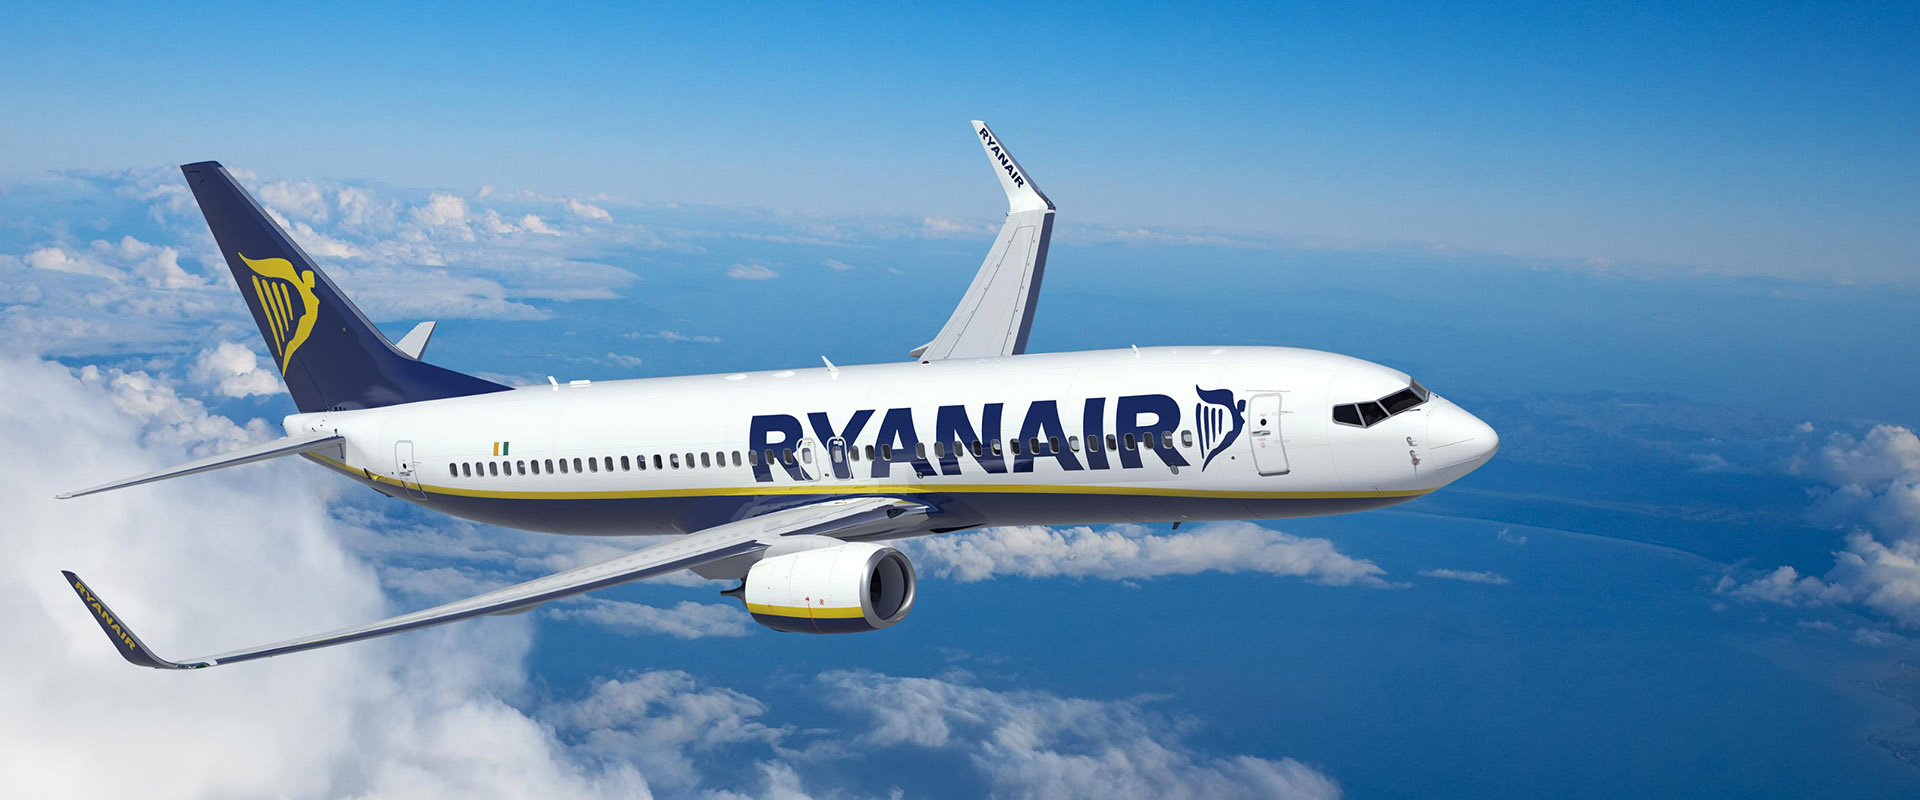 IATA Confirms Ryanair Is Europe’s Favourite Airline